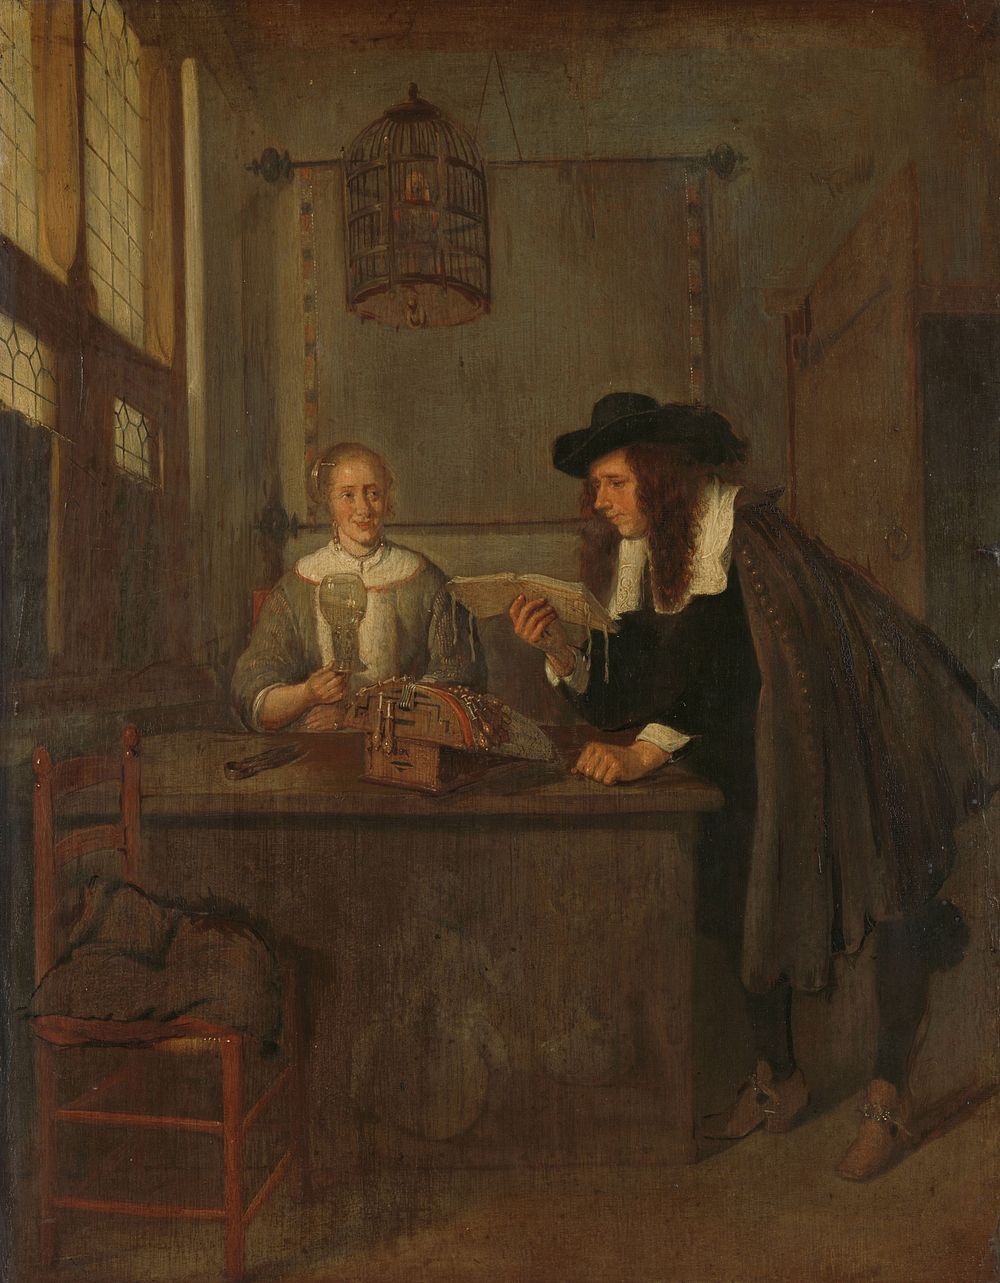 Interior with Lace-Worker and a Visitor (1650 - 1668) by Quiringh Gerritsz van Brekelenkam